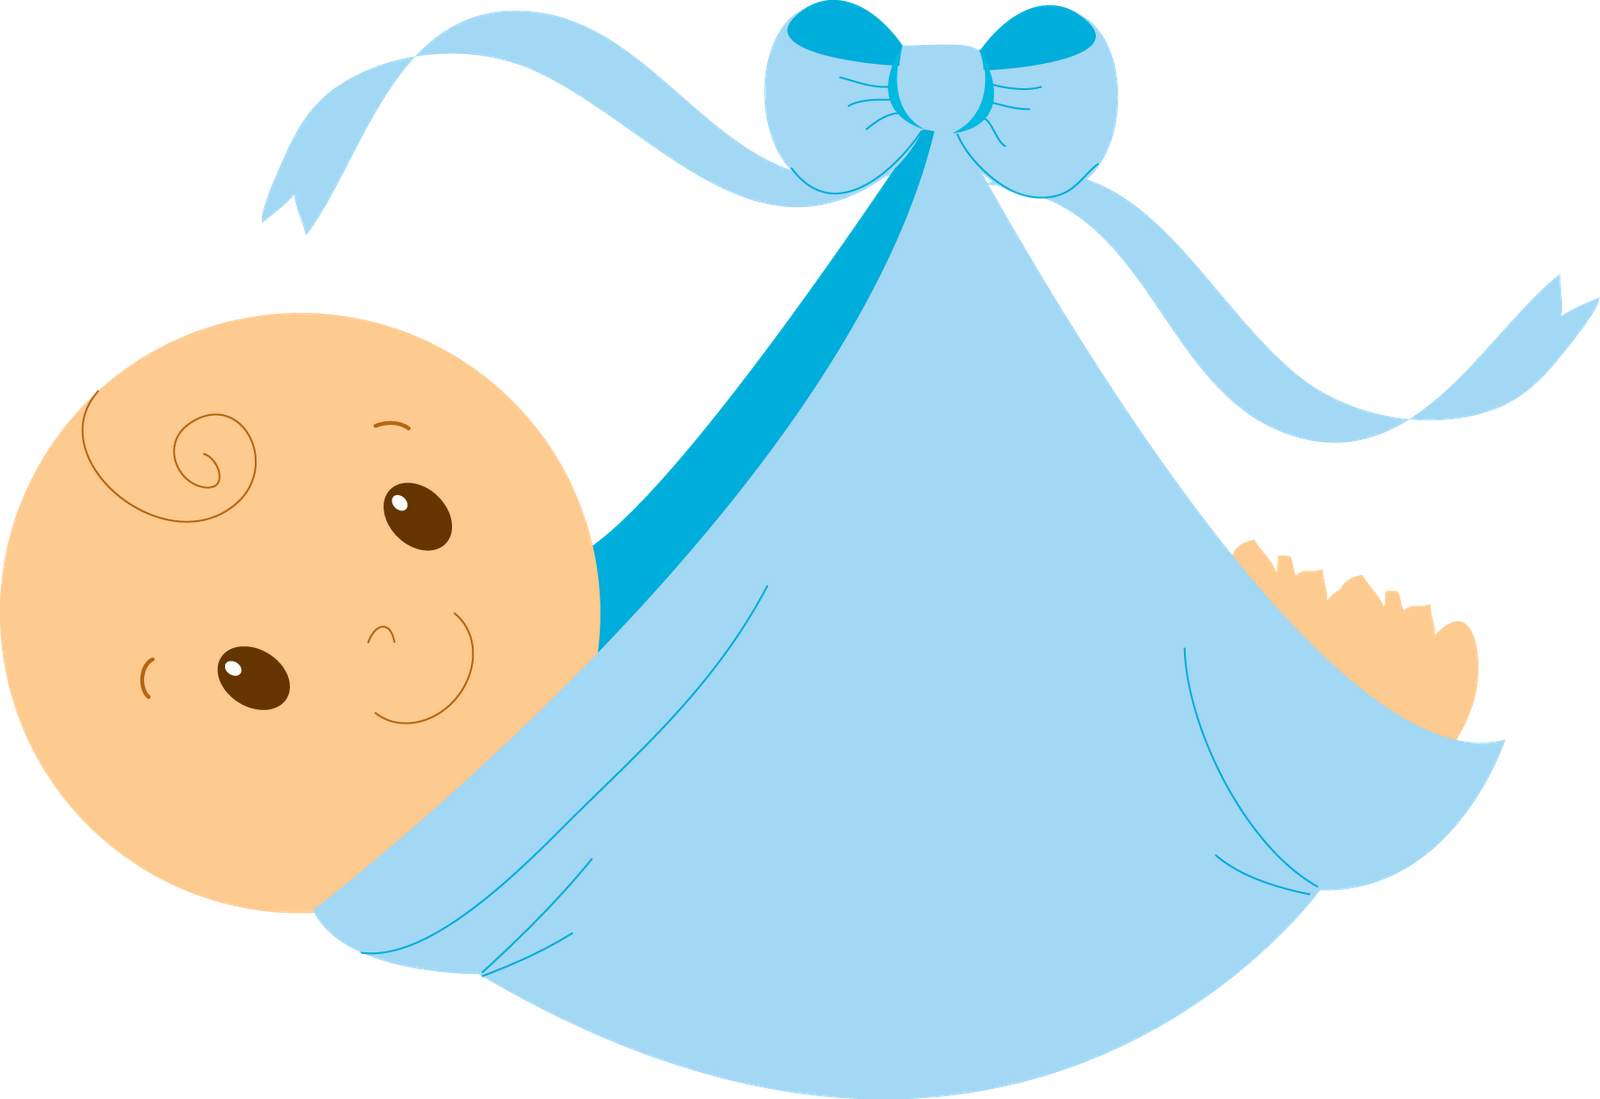 1000+ images about Baby shower Clipart